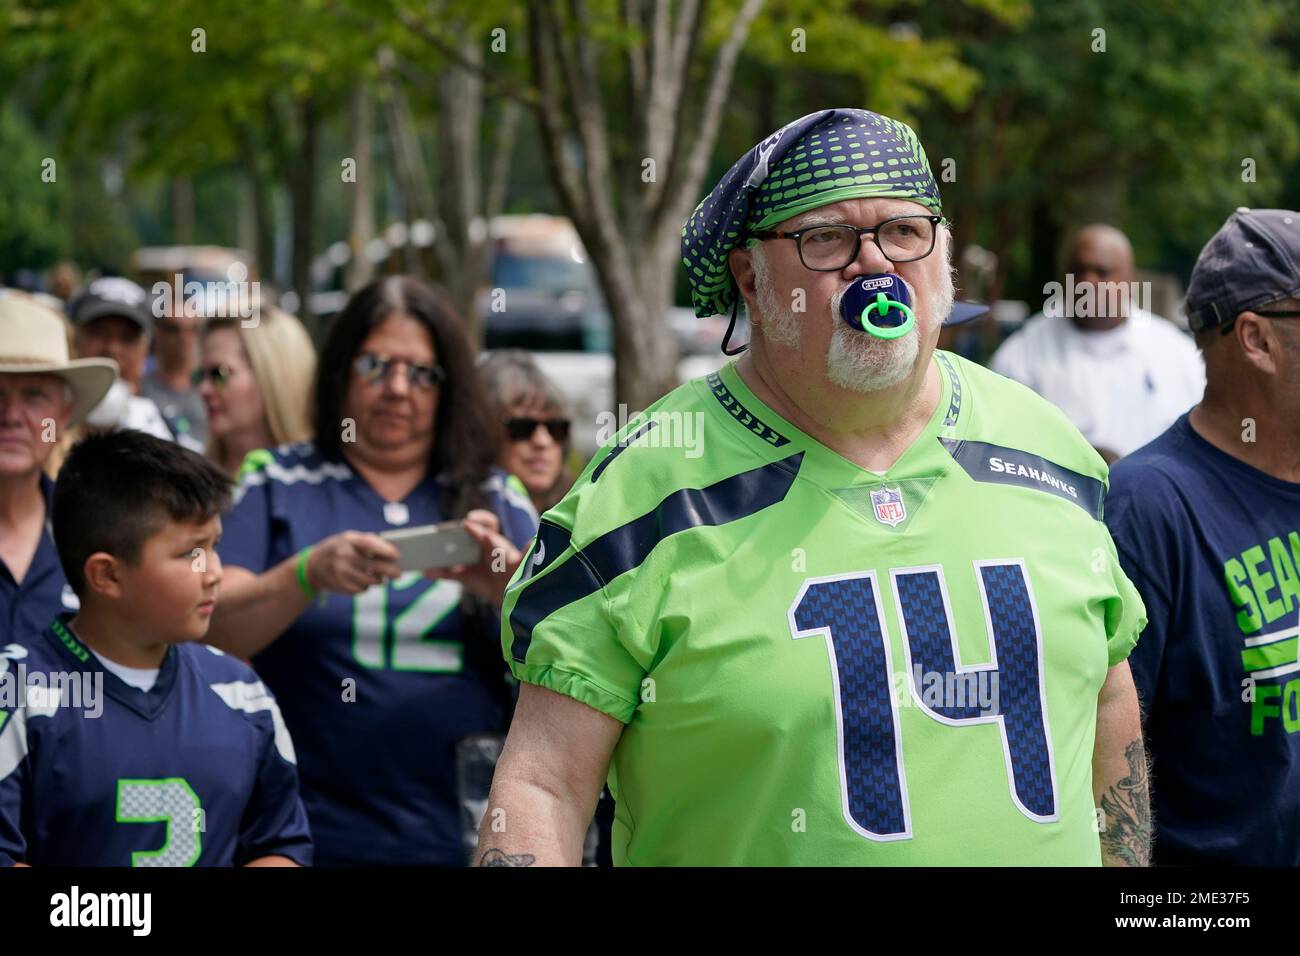 Larry Wales, of Seattle, wears the #14 jersey of Seattle Seahawks wide  receiver DK Metcalf as well as Metcalf's trademark pacifier mouth guard as  he arrives to watch NFL football practice, Wednesday,